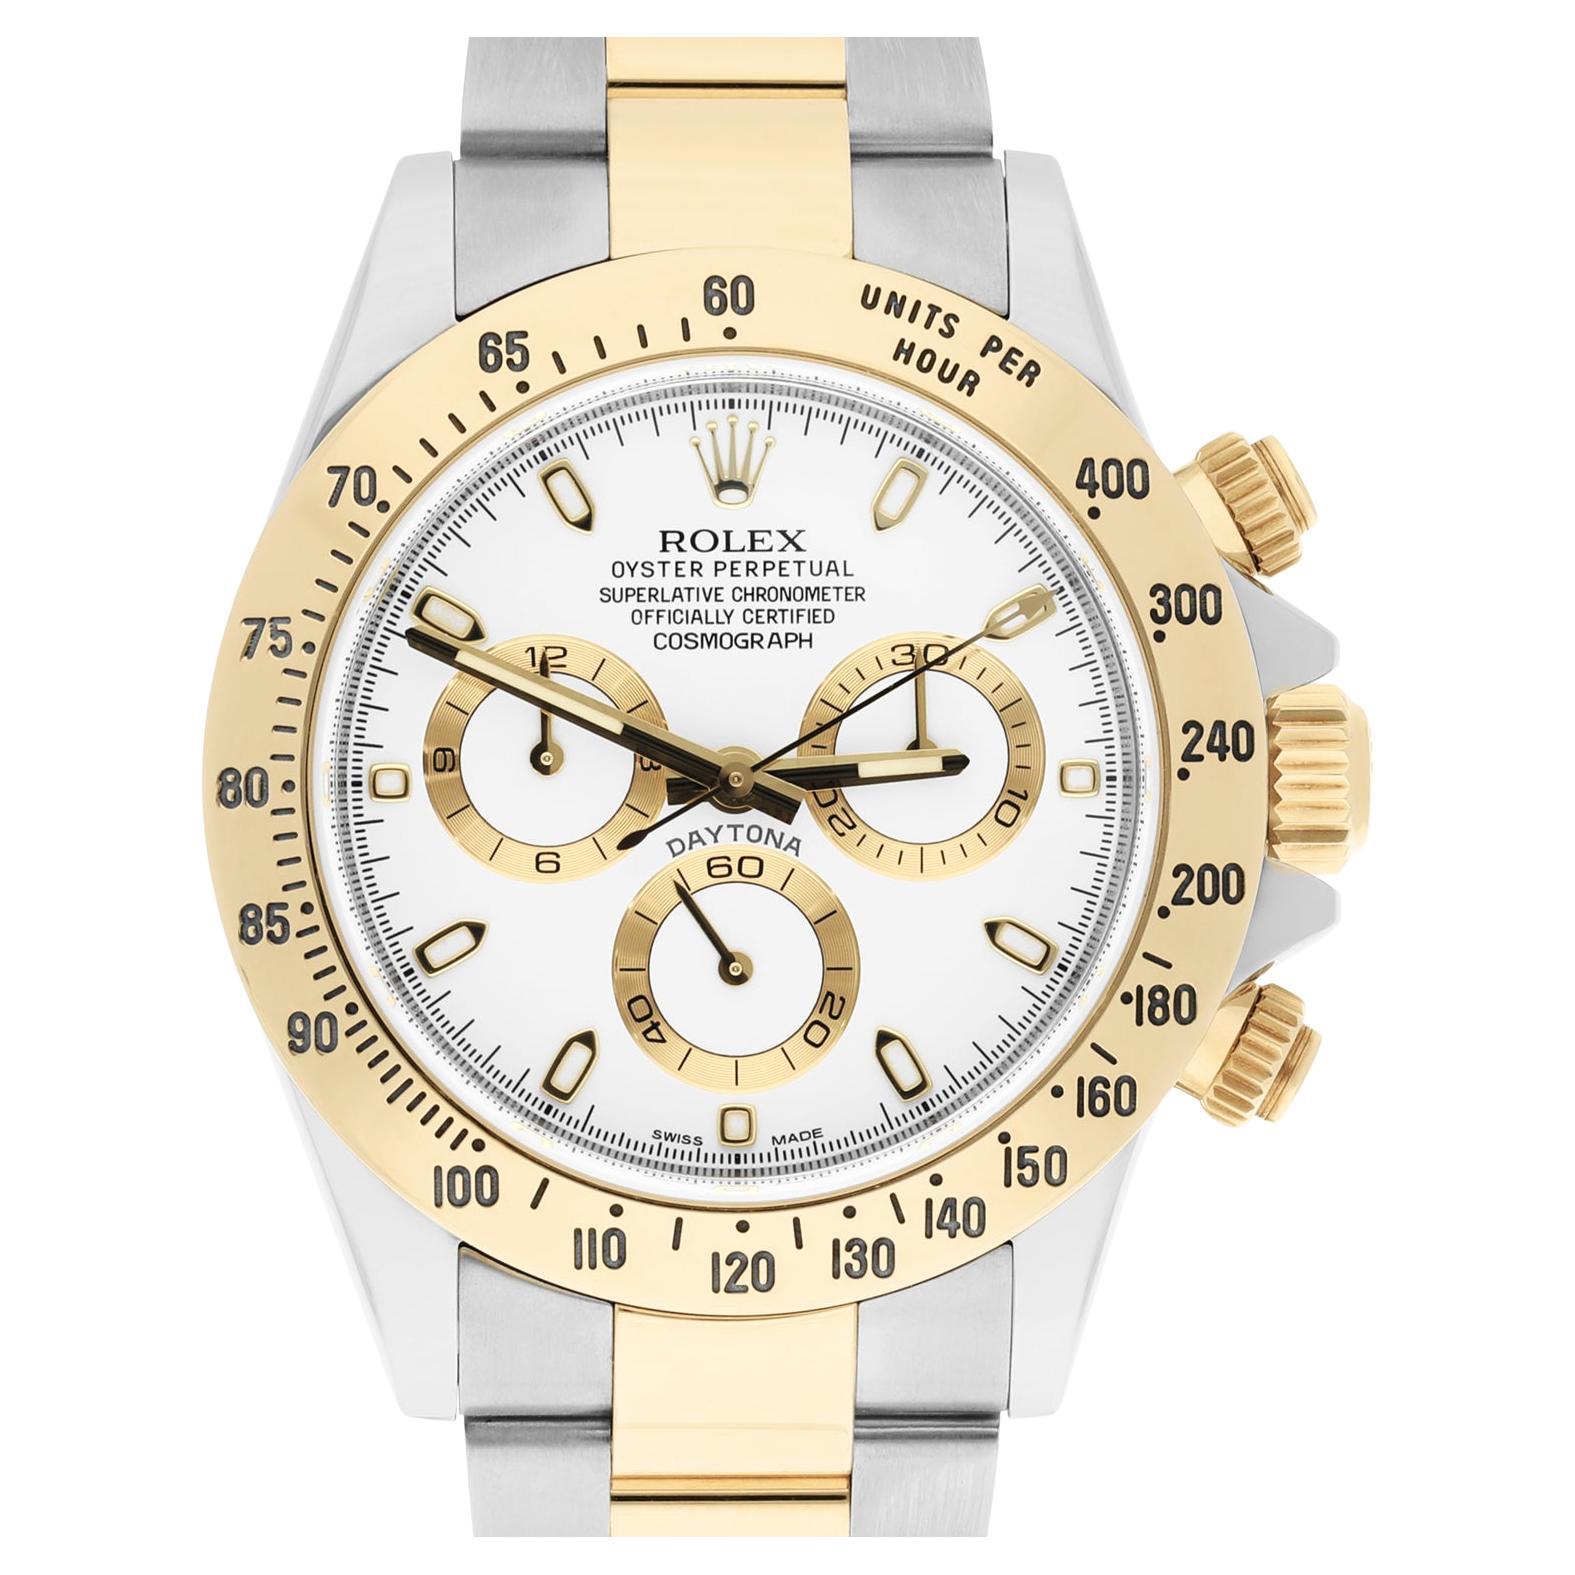 Rolex Daytona Stainless Steel Yellow Gold White Dial Mens Watch 116523 Complete For Sale